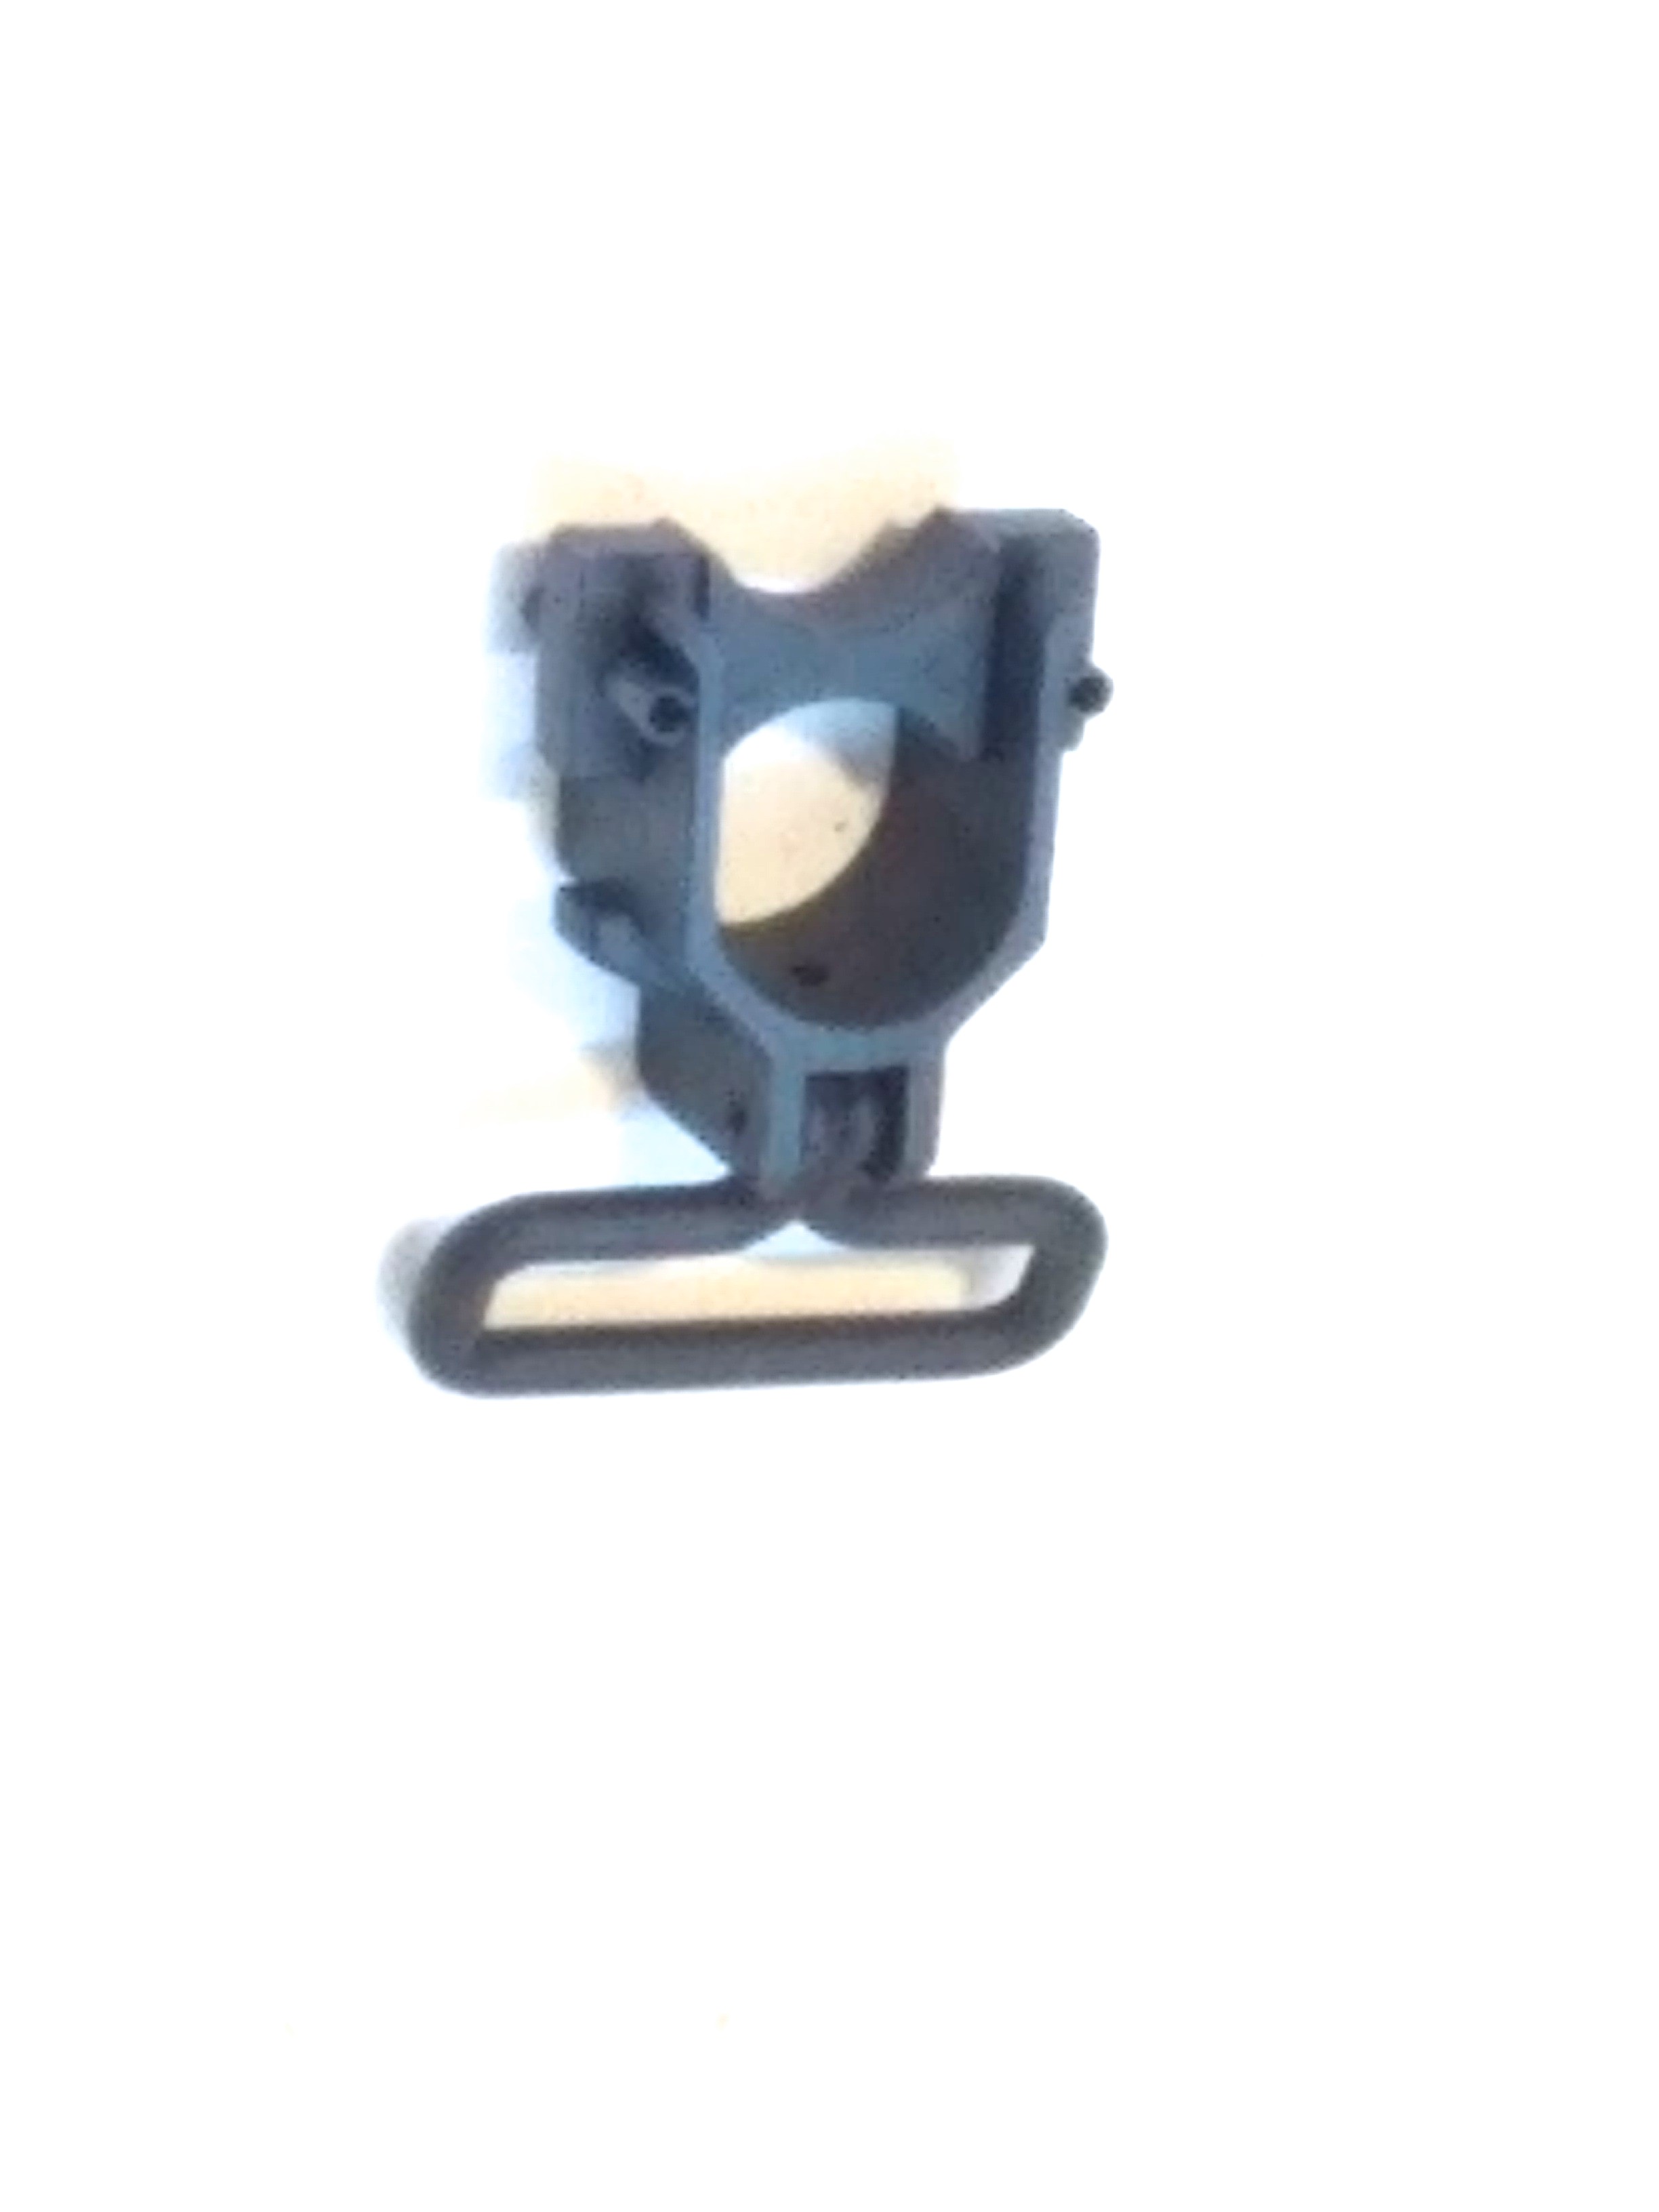 FRONT SLING MOUNT FOR M16/M4